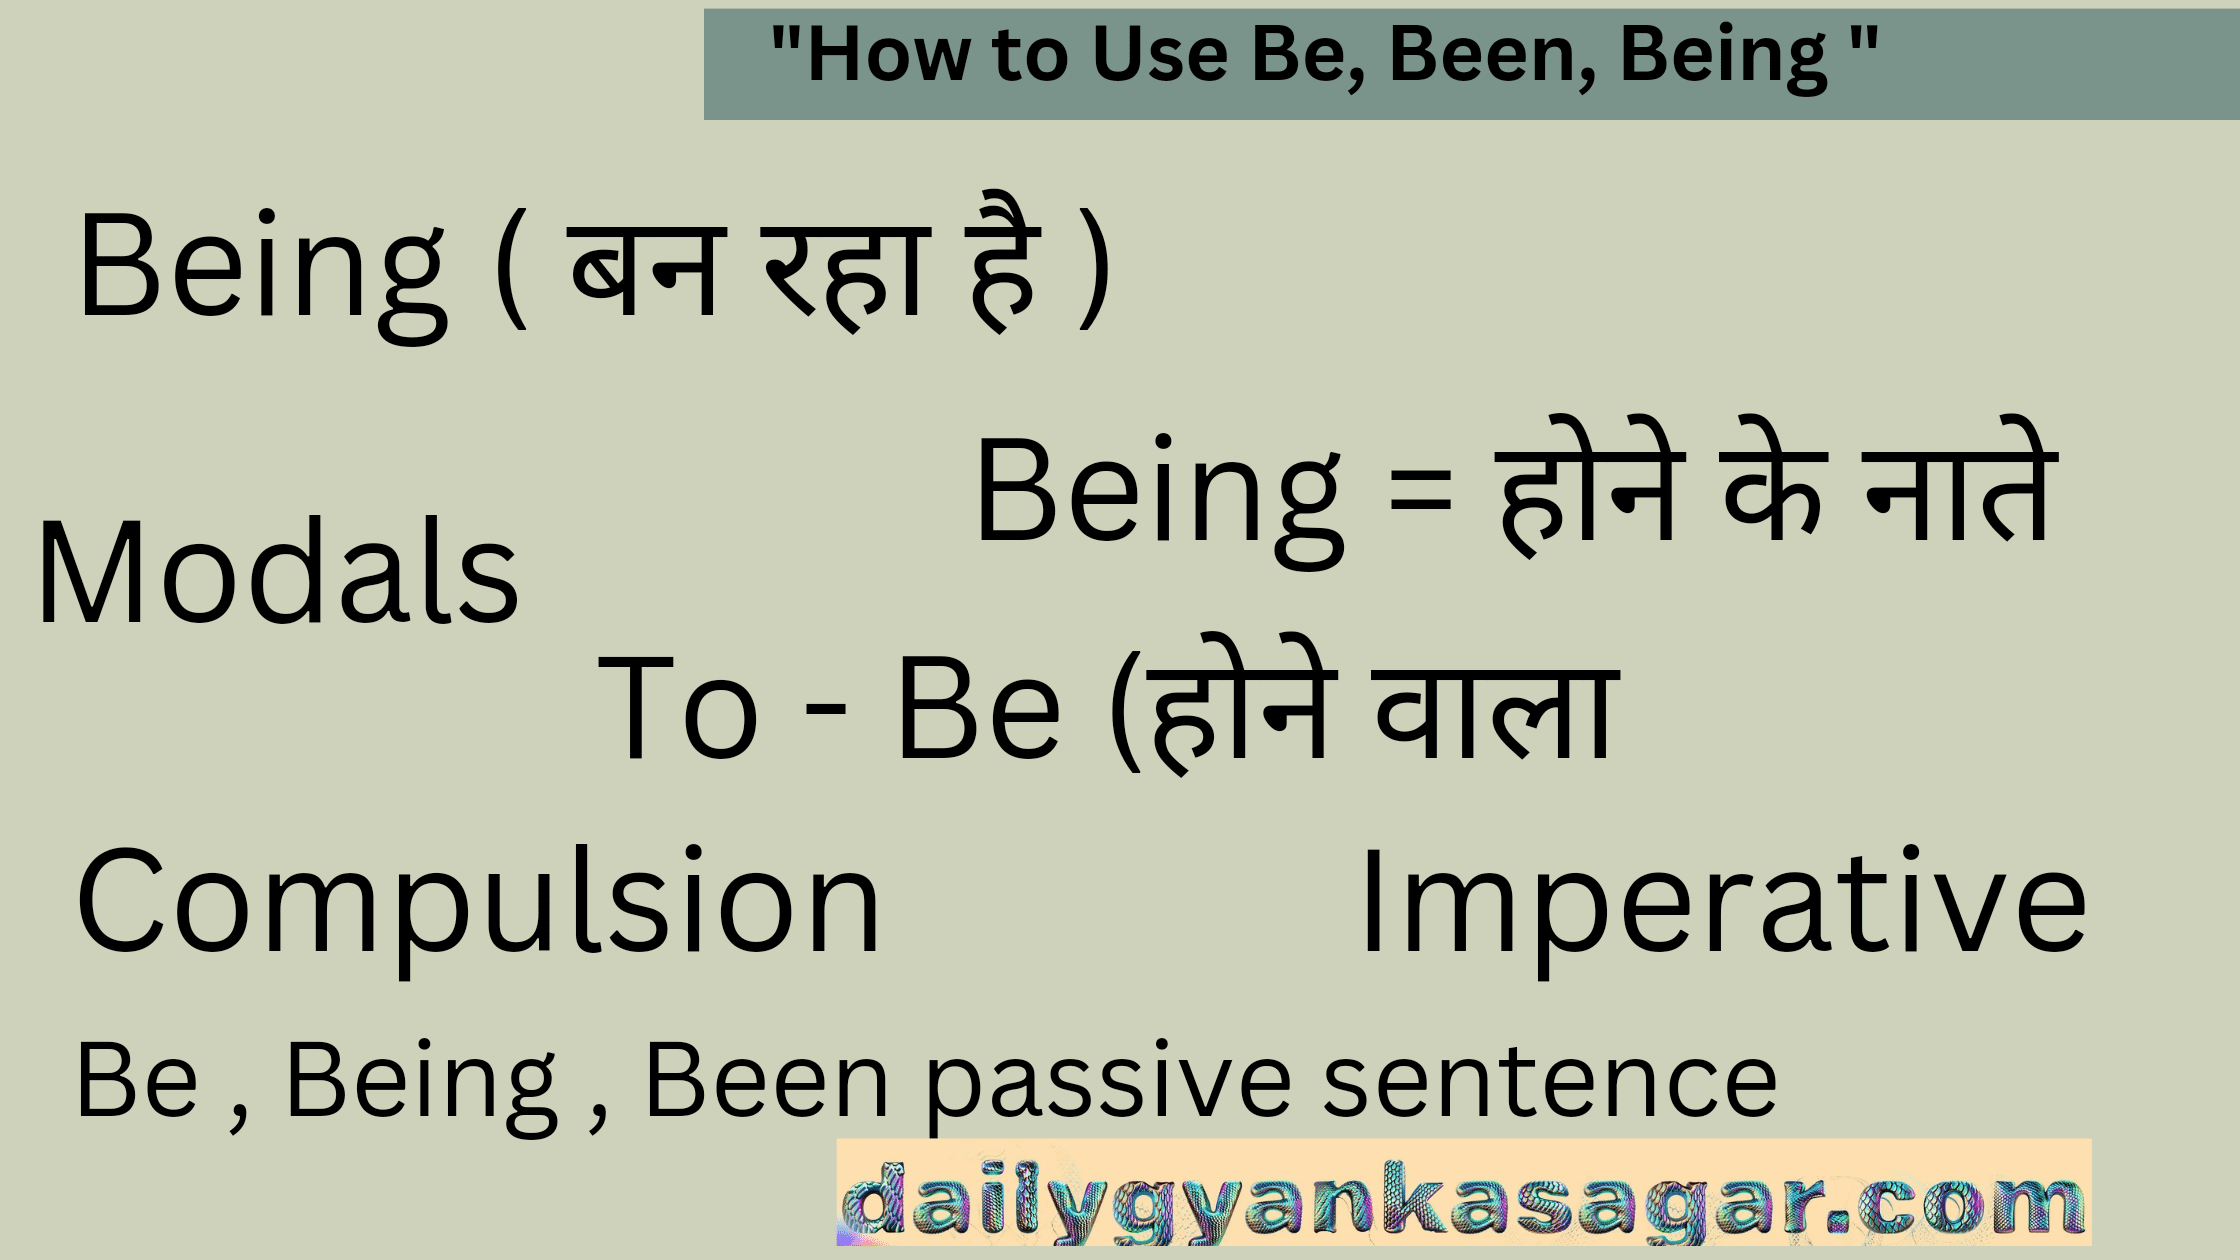 How to use Be, Been,Being